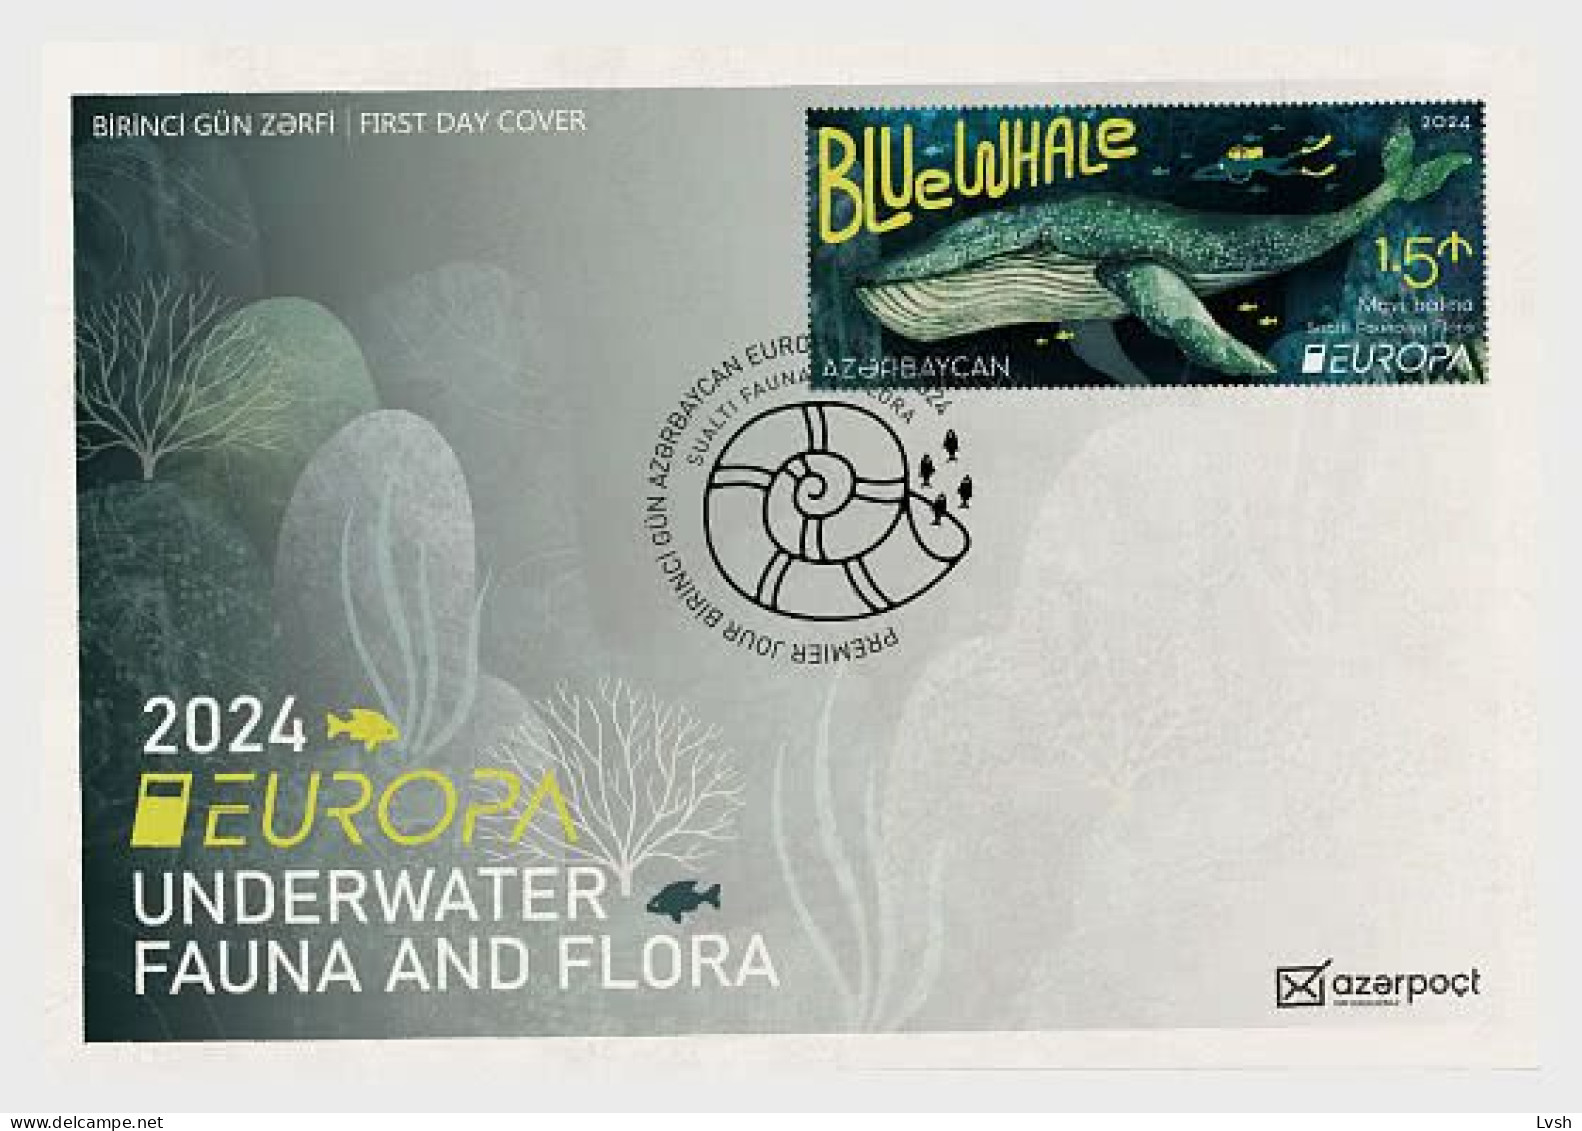 Luxembourg.2024.Europa CEPT.Underwater Fauna And Flora.FDC./2/. - 2024